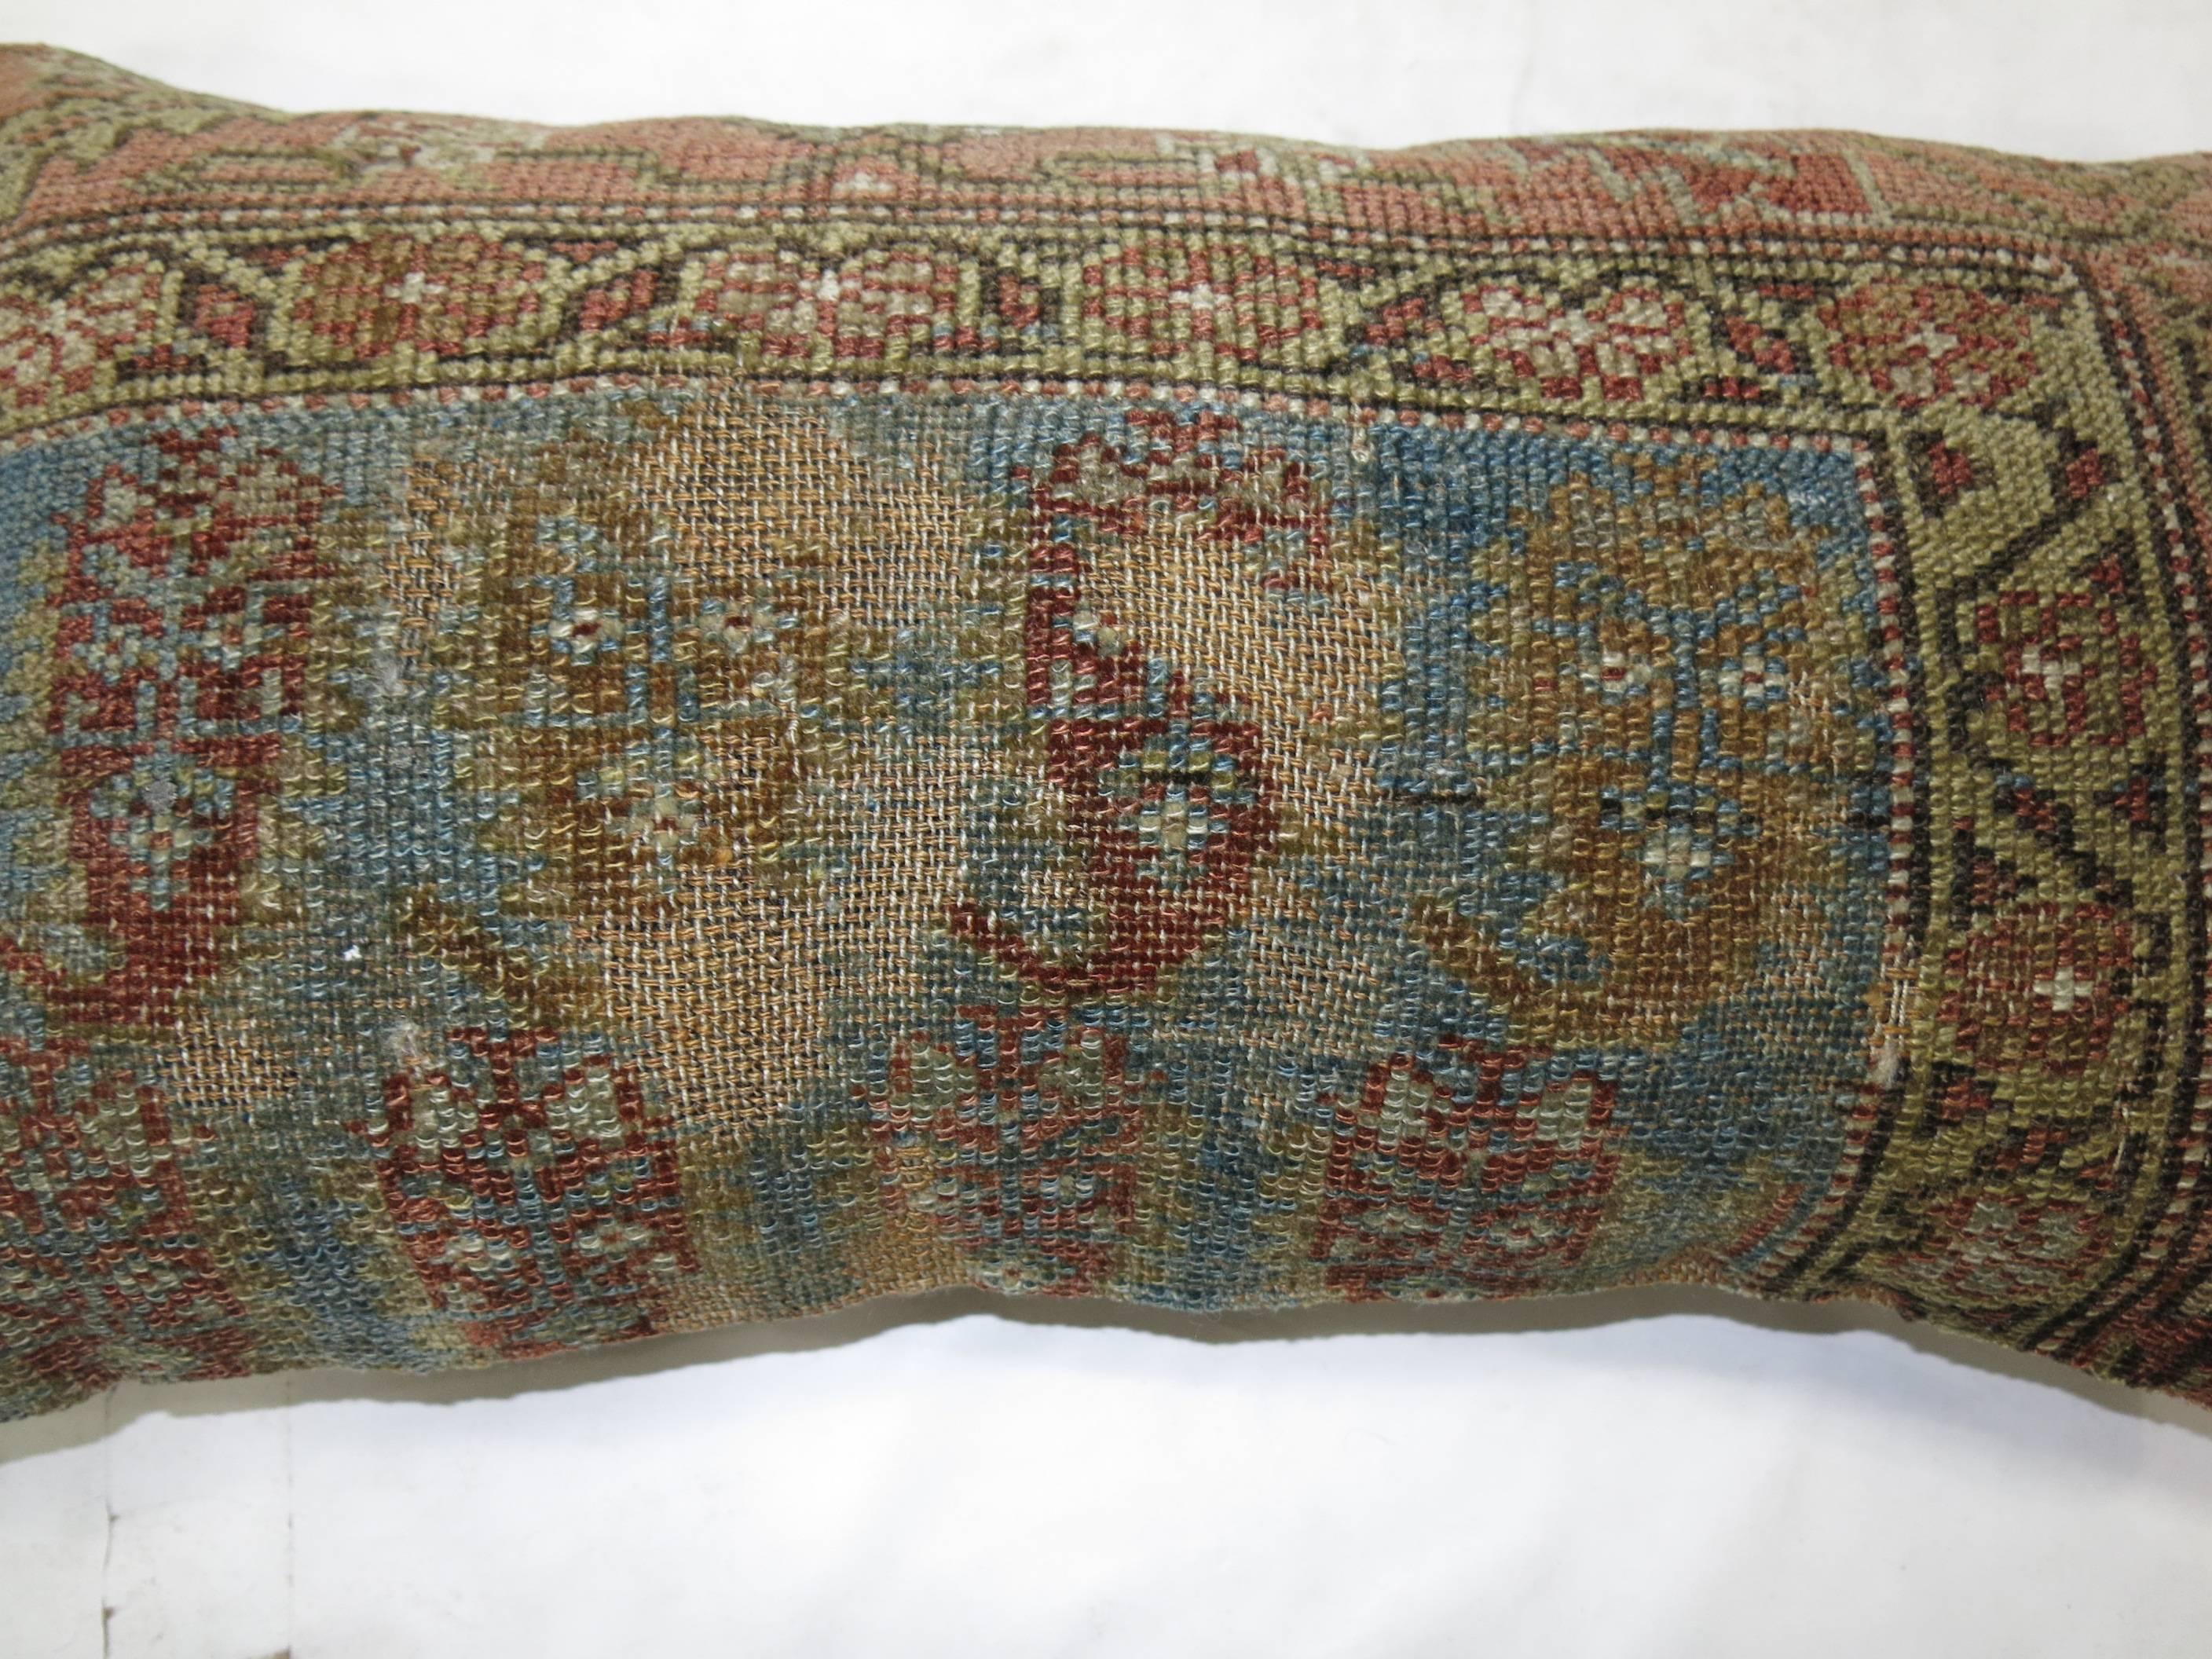 Bolster size pillow made from an antique Persian Malayer rug. zipper closure and polyfill insert included

14'' x 26''